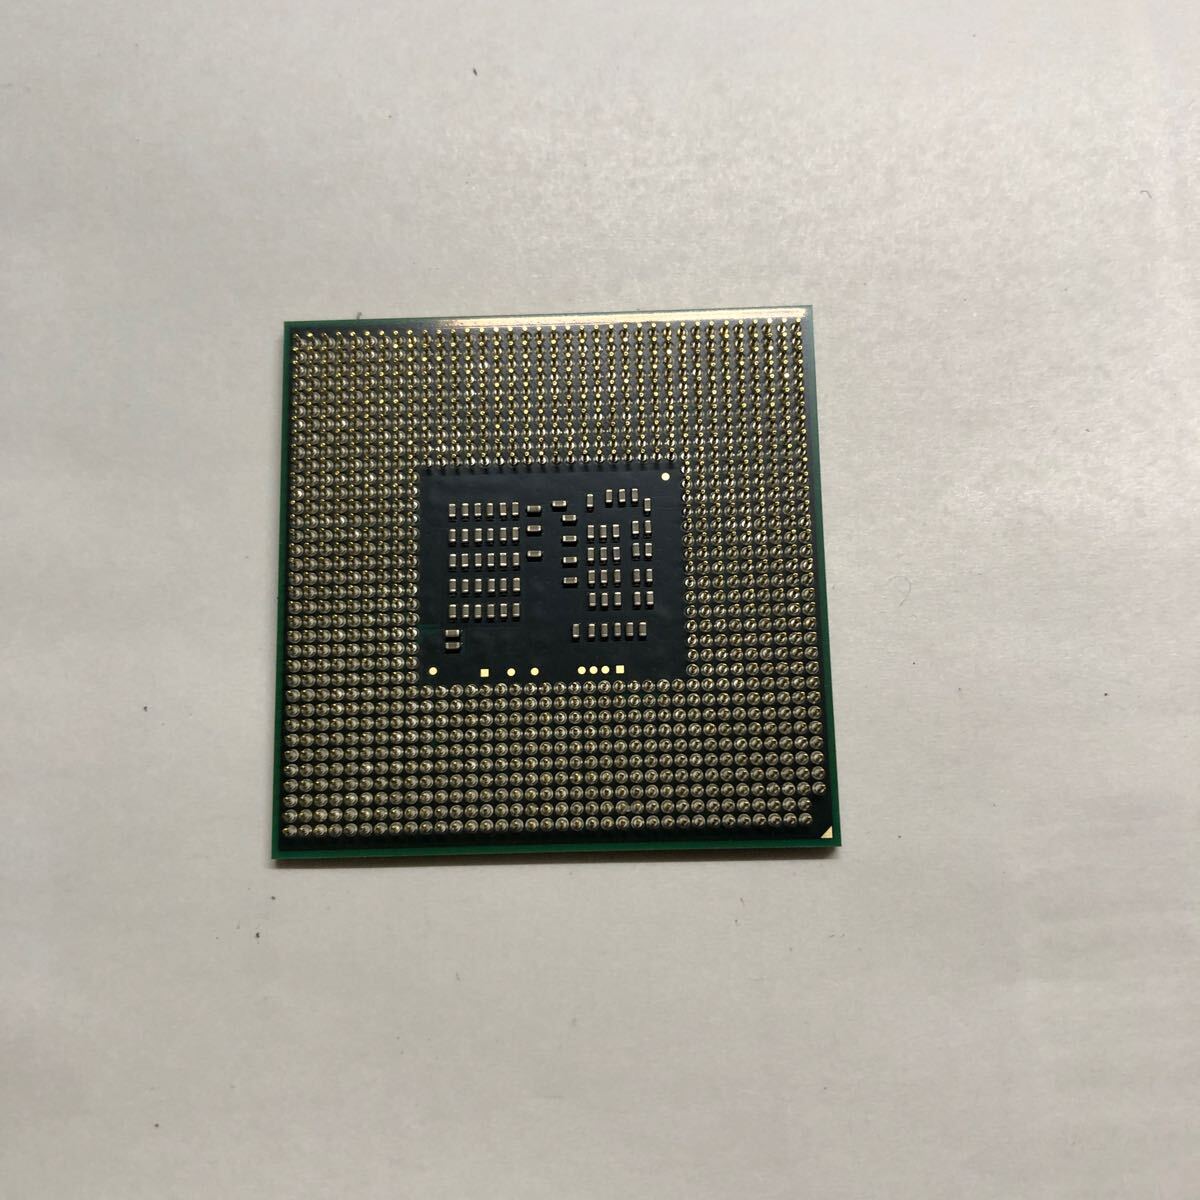 Intel Core i3 -380M 2.53GHz 3M SLBZX /170